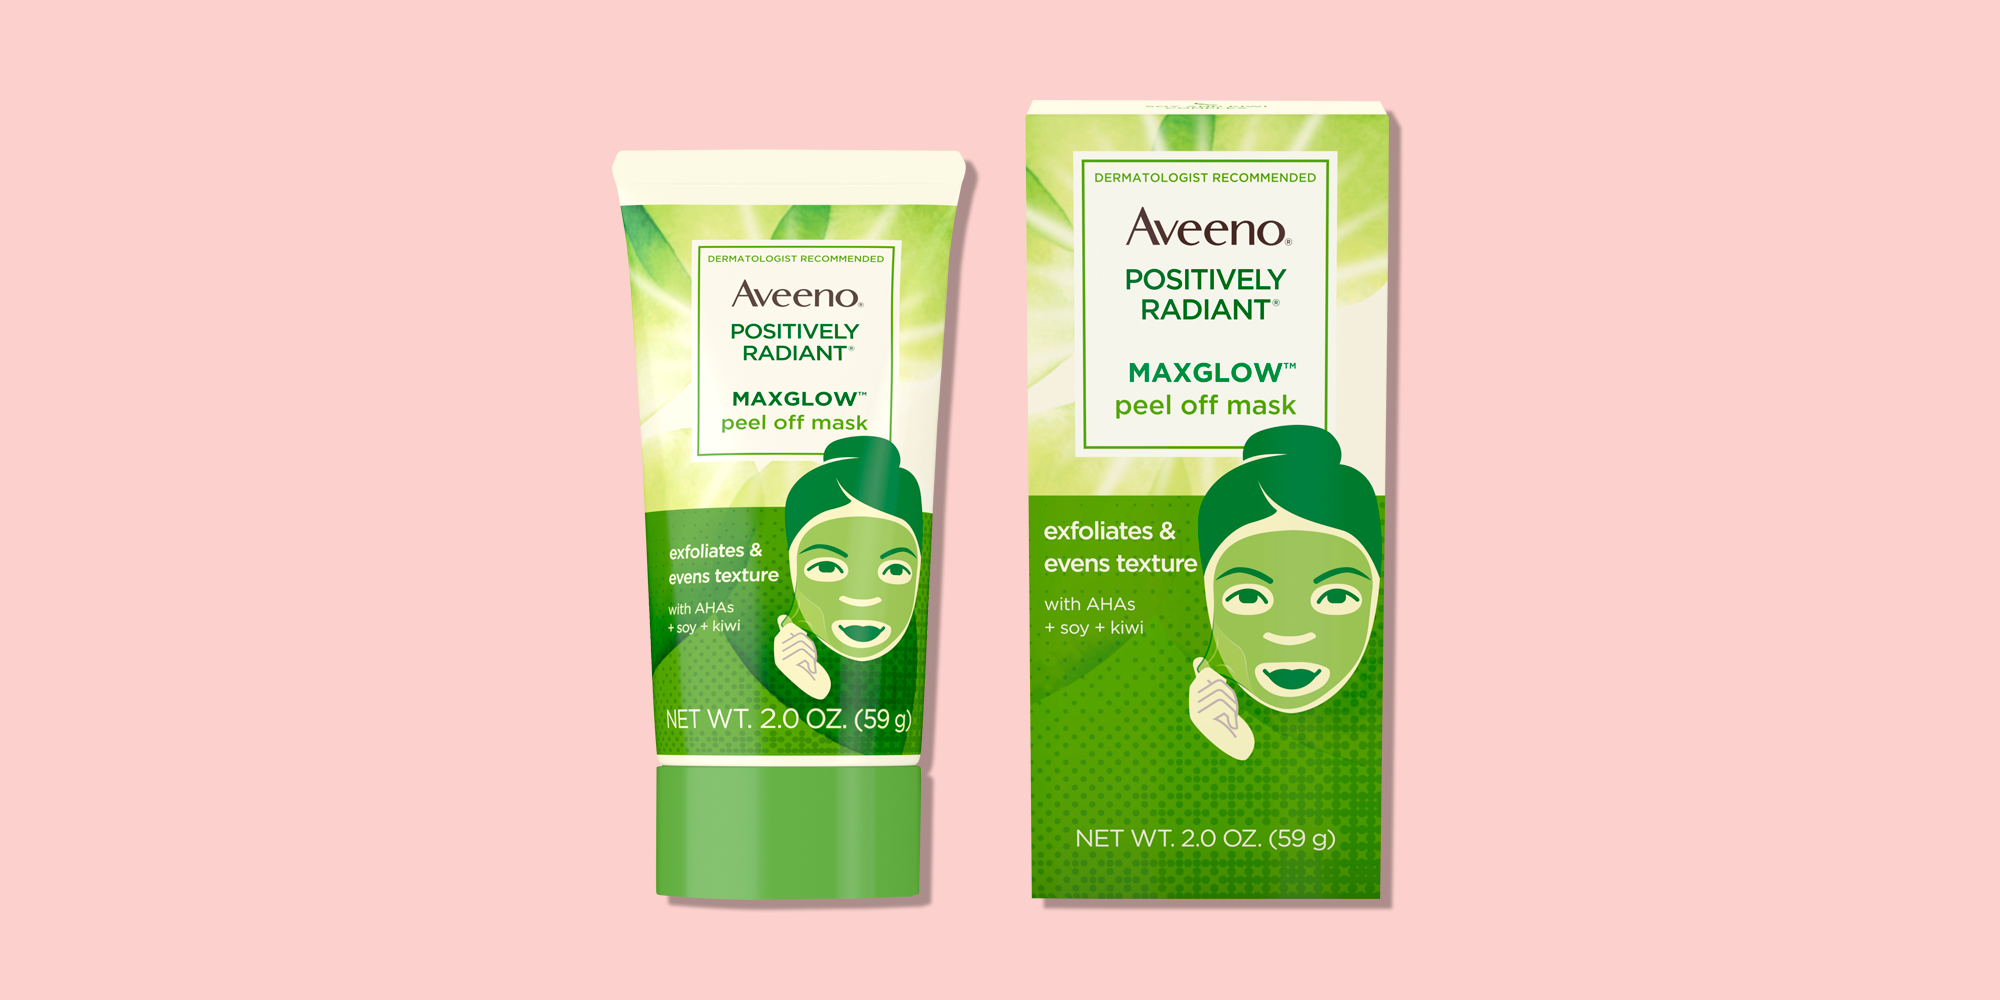 20 Best Sheet Masks for Healthy, Glowing Skin - Hydrating Facial